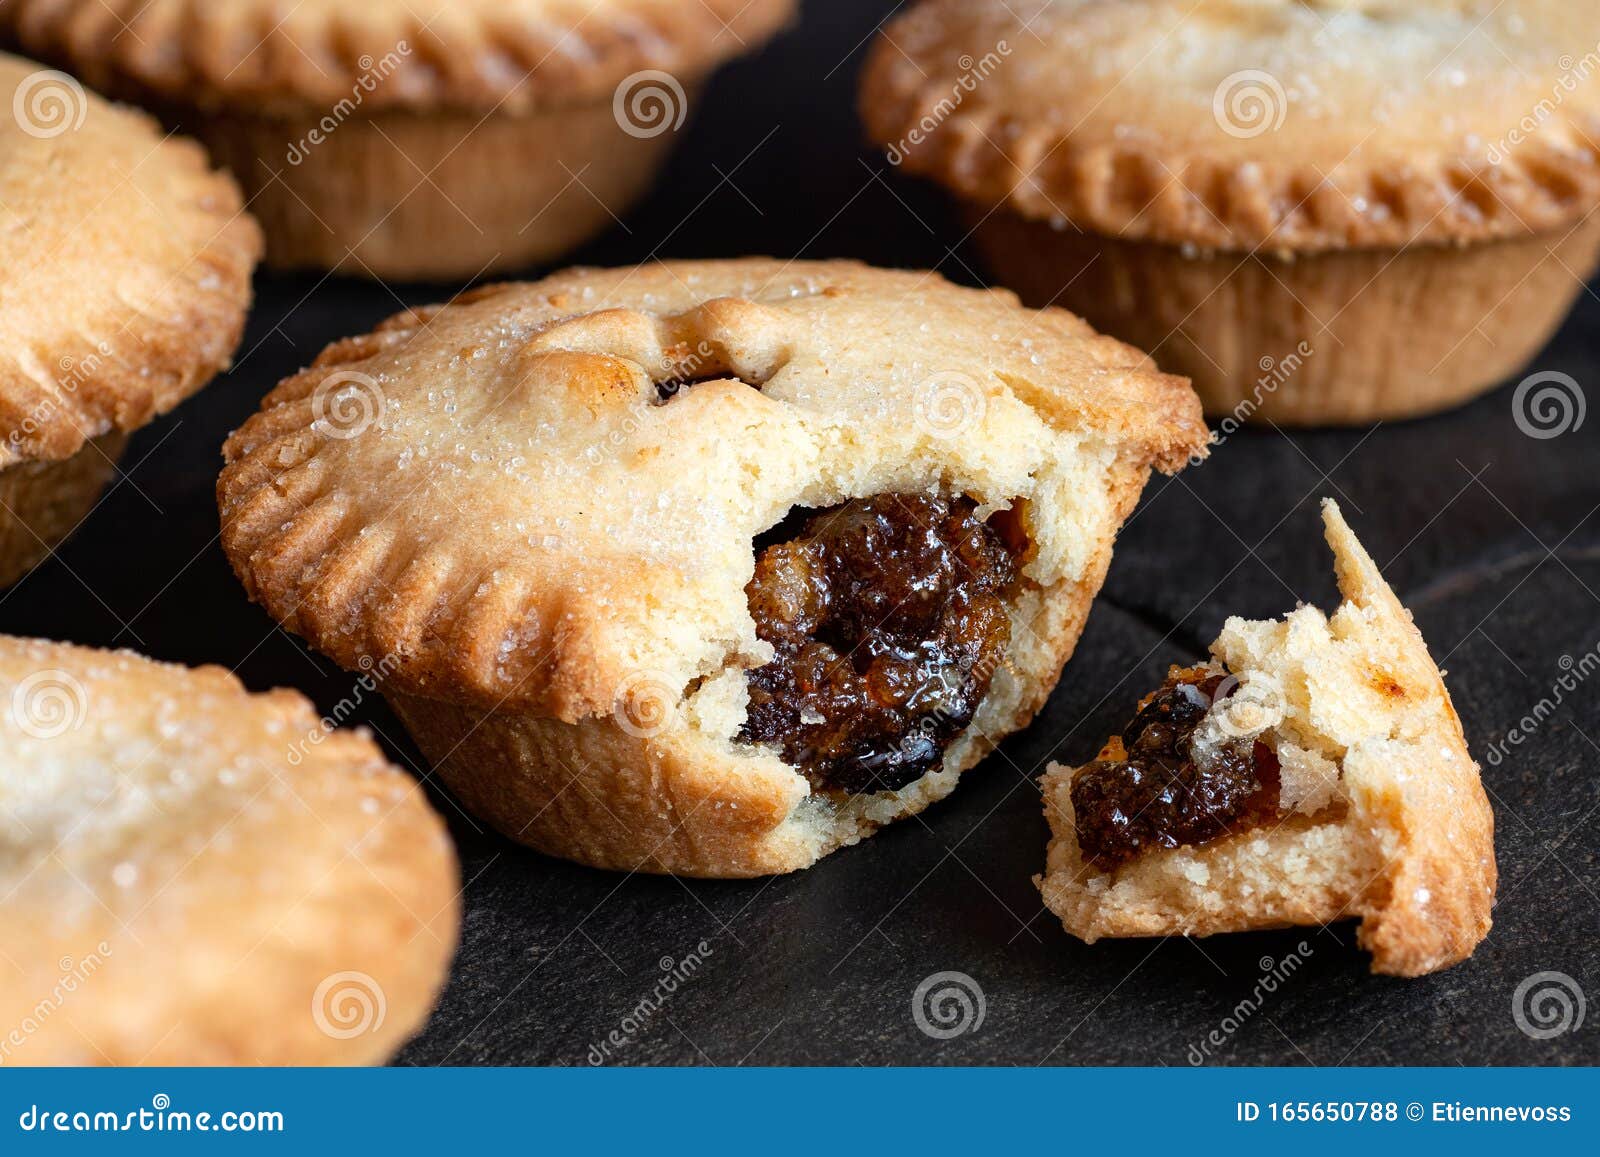 https://thumbs.dreamstime.com/z/broken-open-traditional-british-christmas-mince-pie-fruit-filling-next-to-whole-pies-black-slate-165650788.jpg